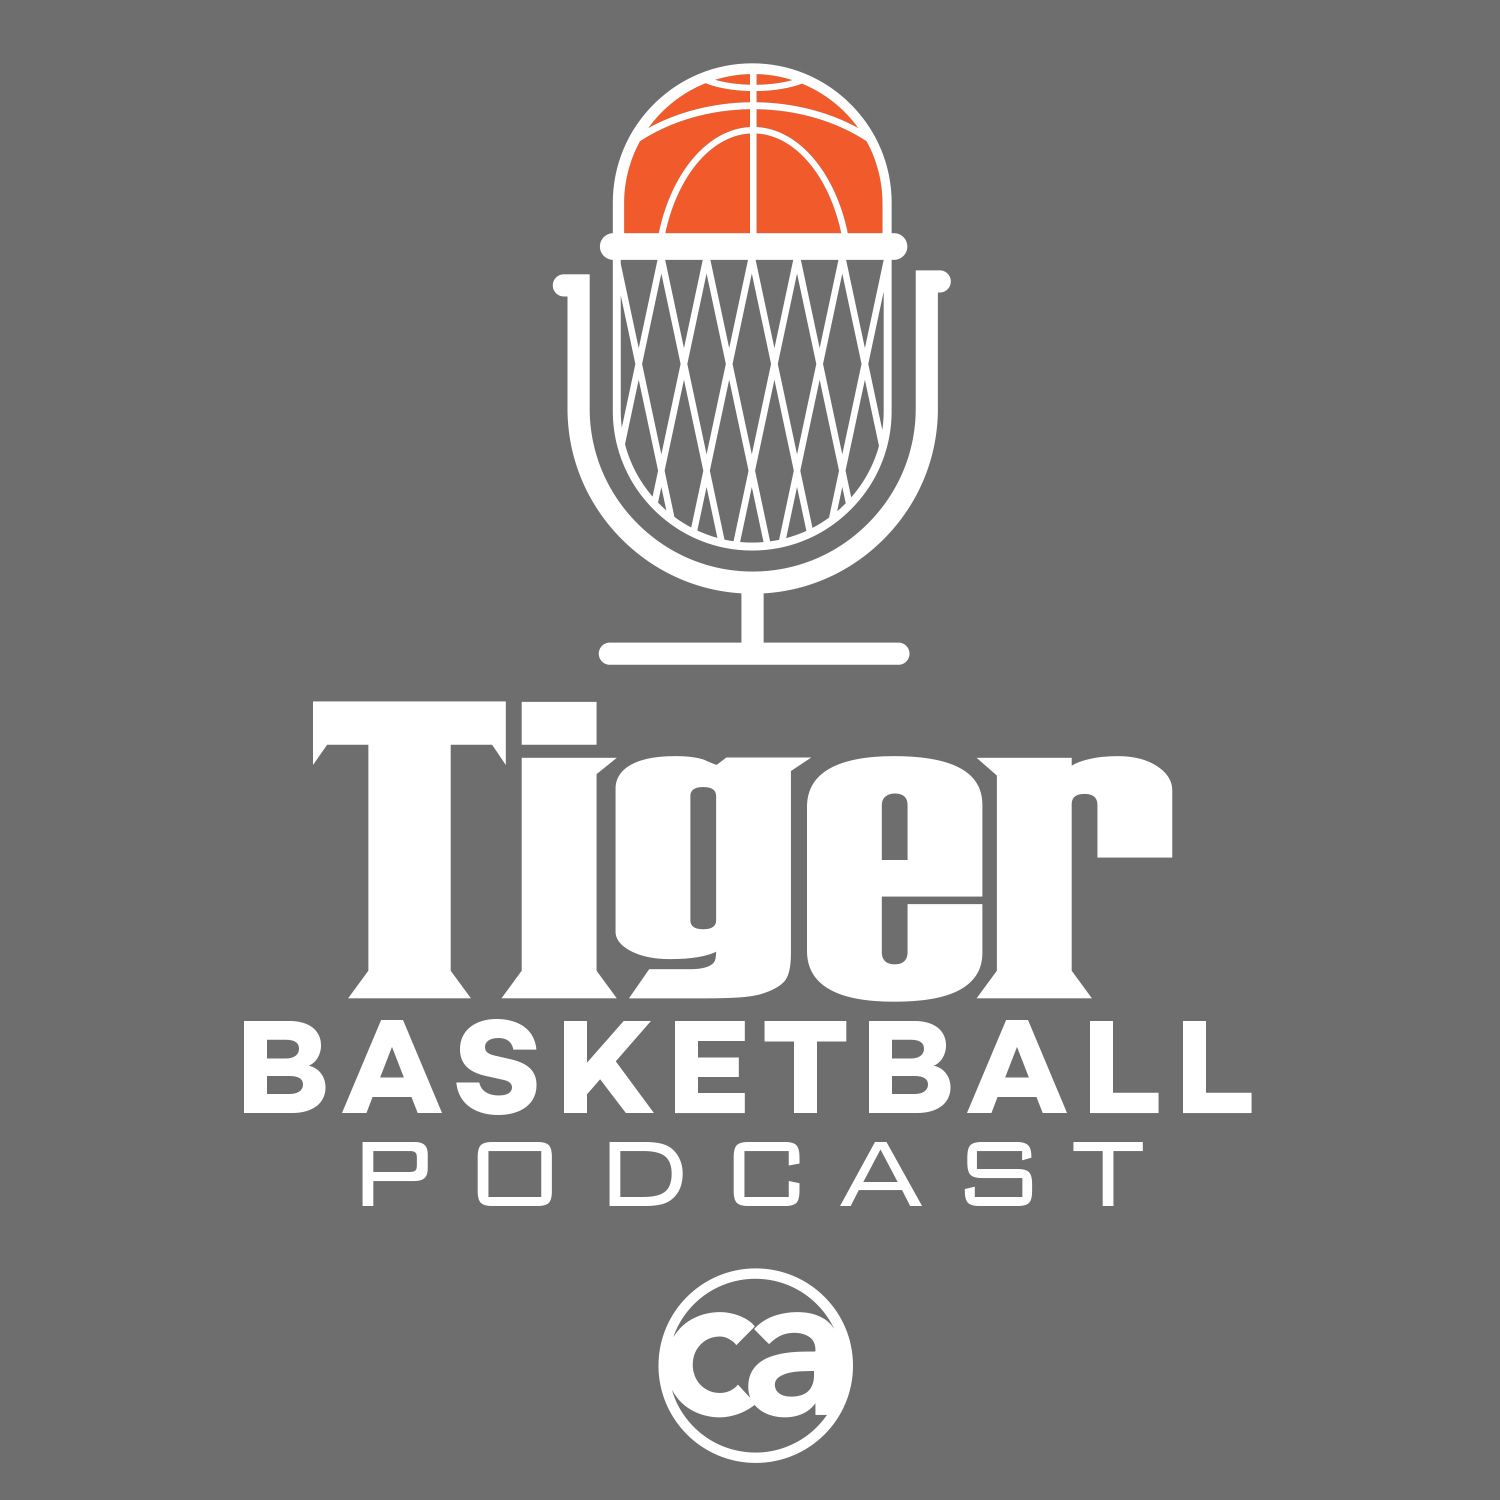 Podcast: Tigers scorching the recruiting trail